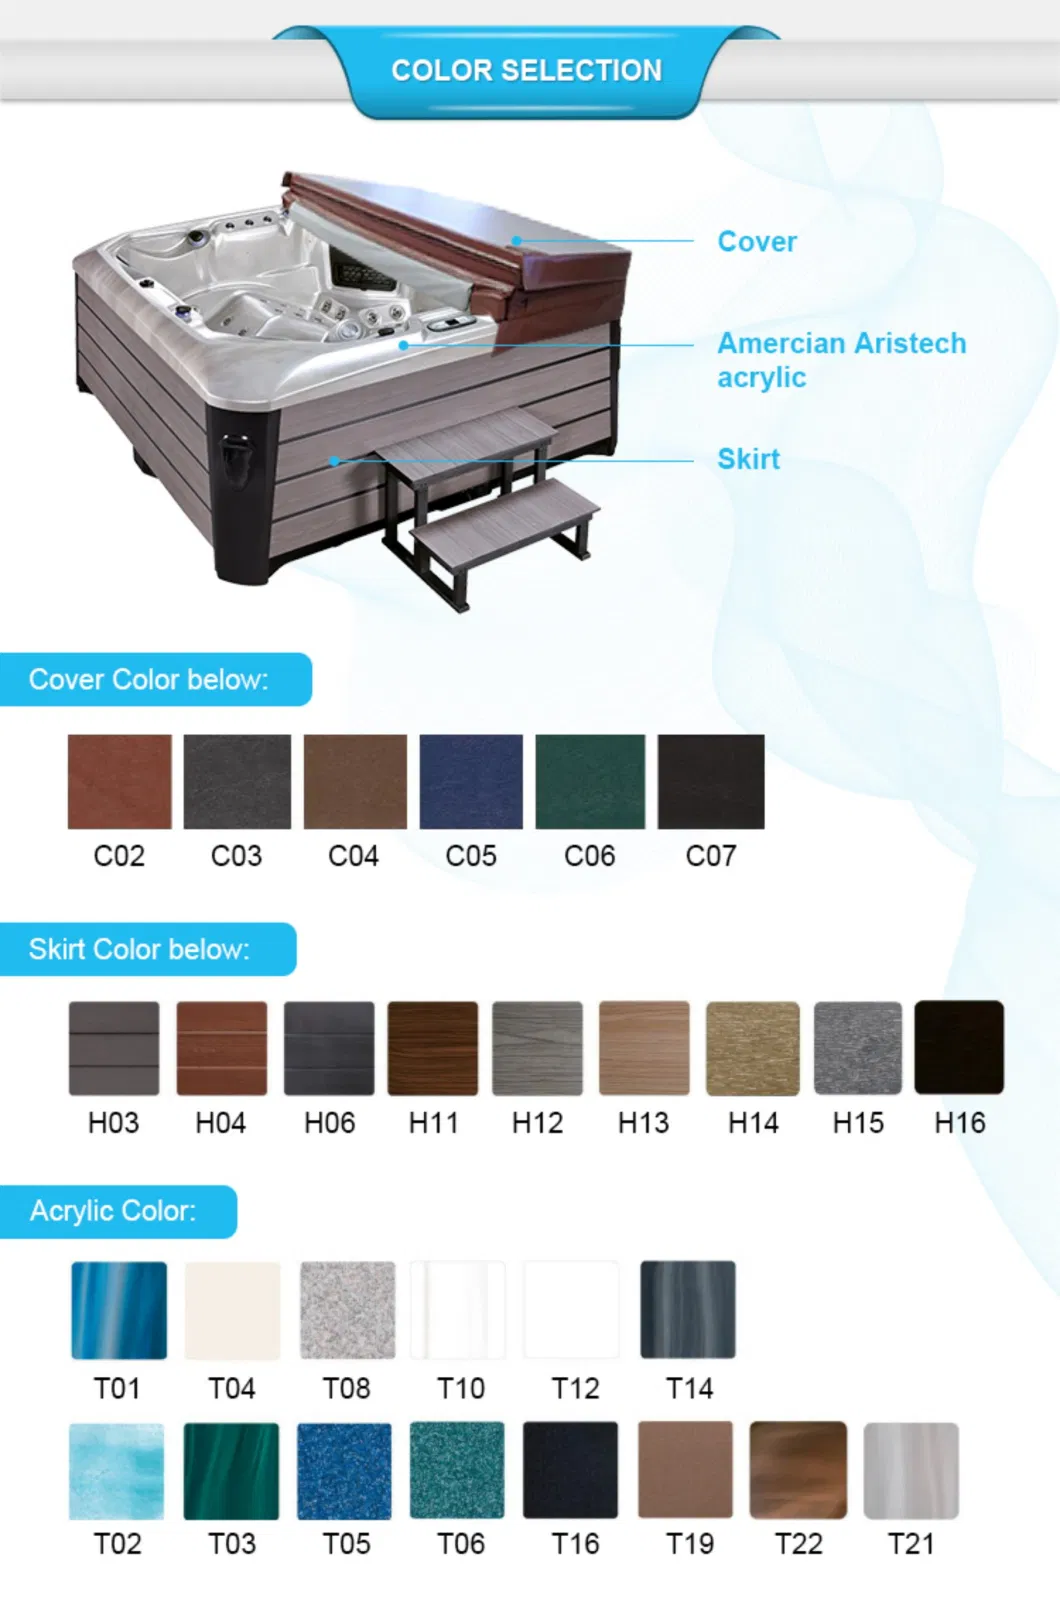 Hot Selling Luxury SPA Tubs Balboa System Aristech Acrylic Whirlpool SPA for Single Person